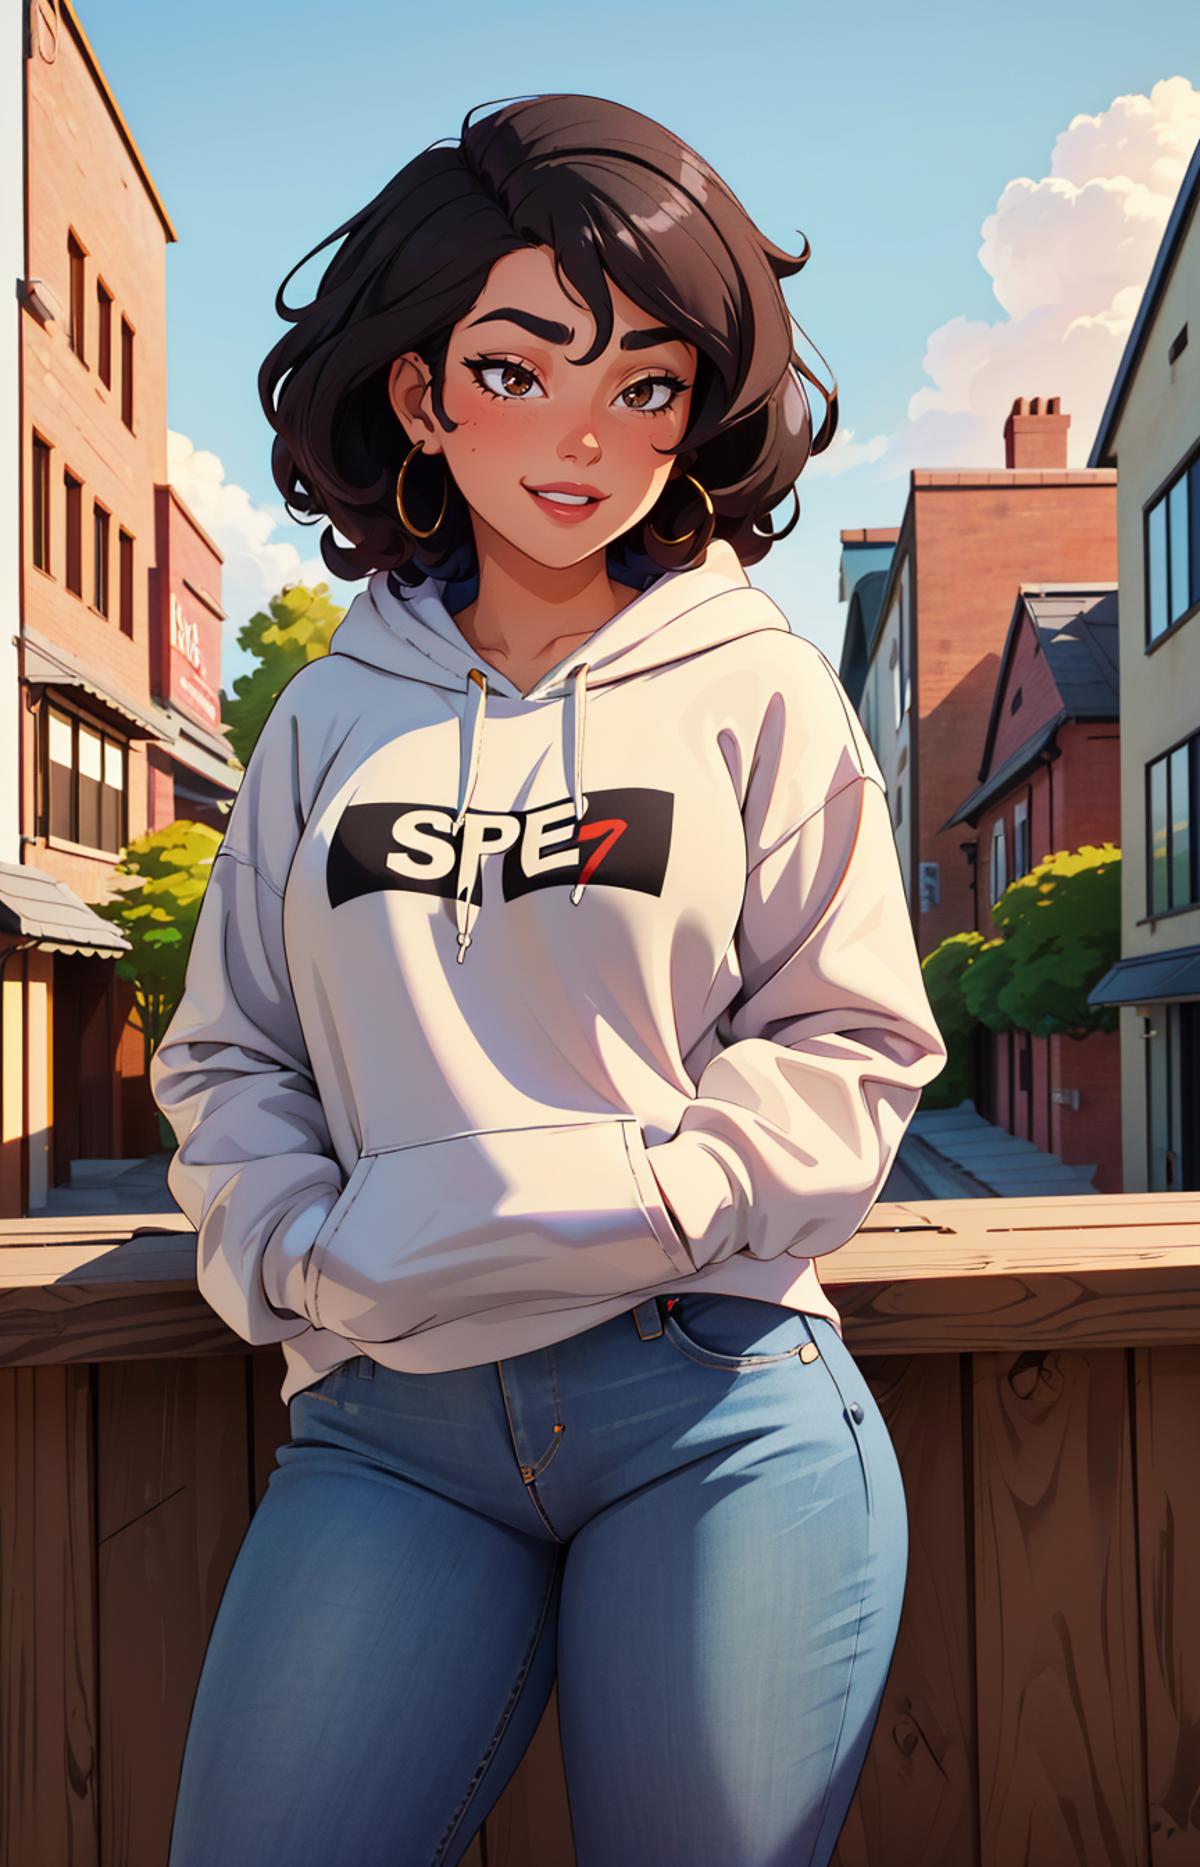 A cartoon illustration of a woman wearing a white sweatshirt with the word "SPE" on it.